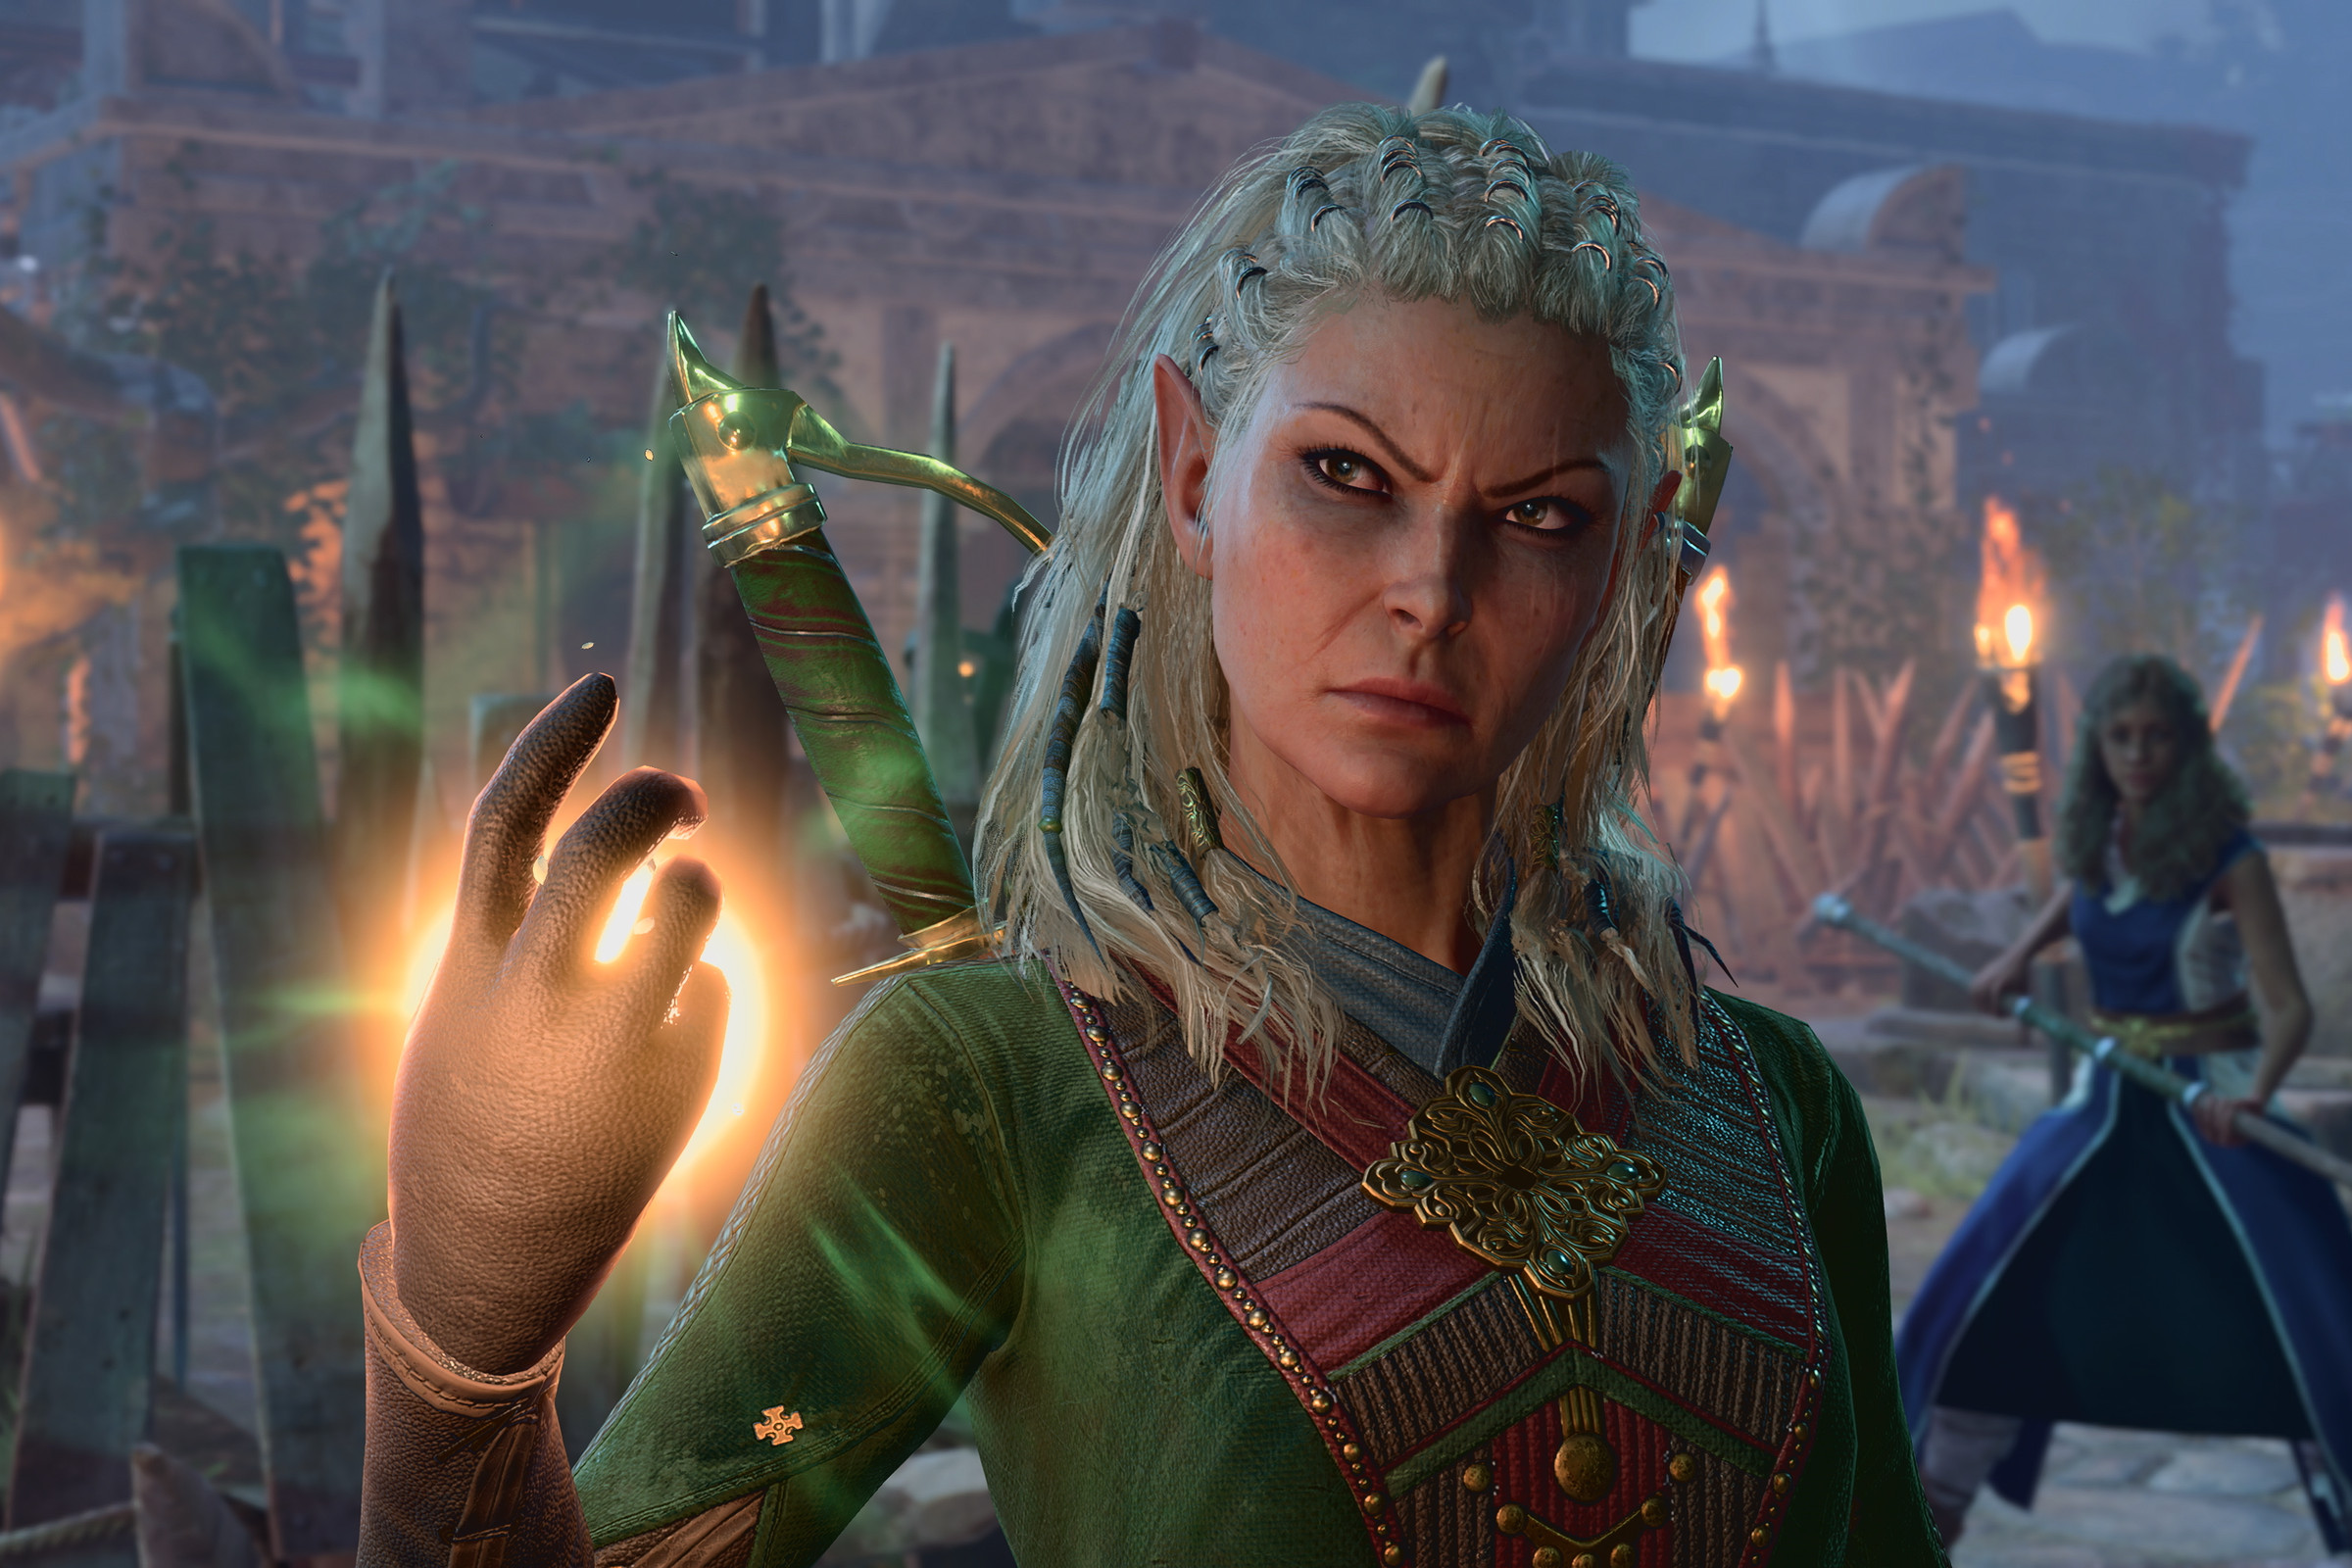 Screenshot from Baldur’s Gate 3 featuring the druid companion Jaheria, an older Caucasian woman wearing green armor with white hair twisted into cornrows.